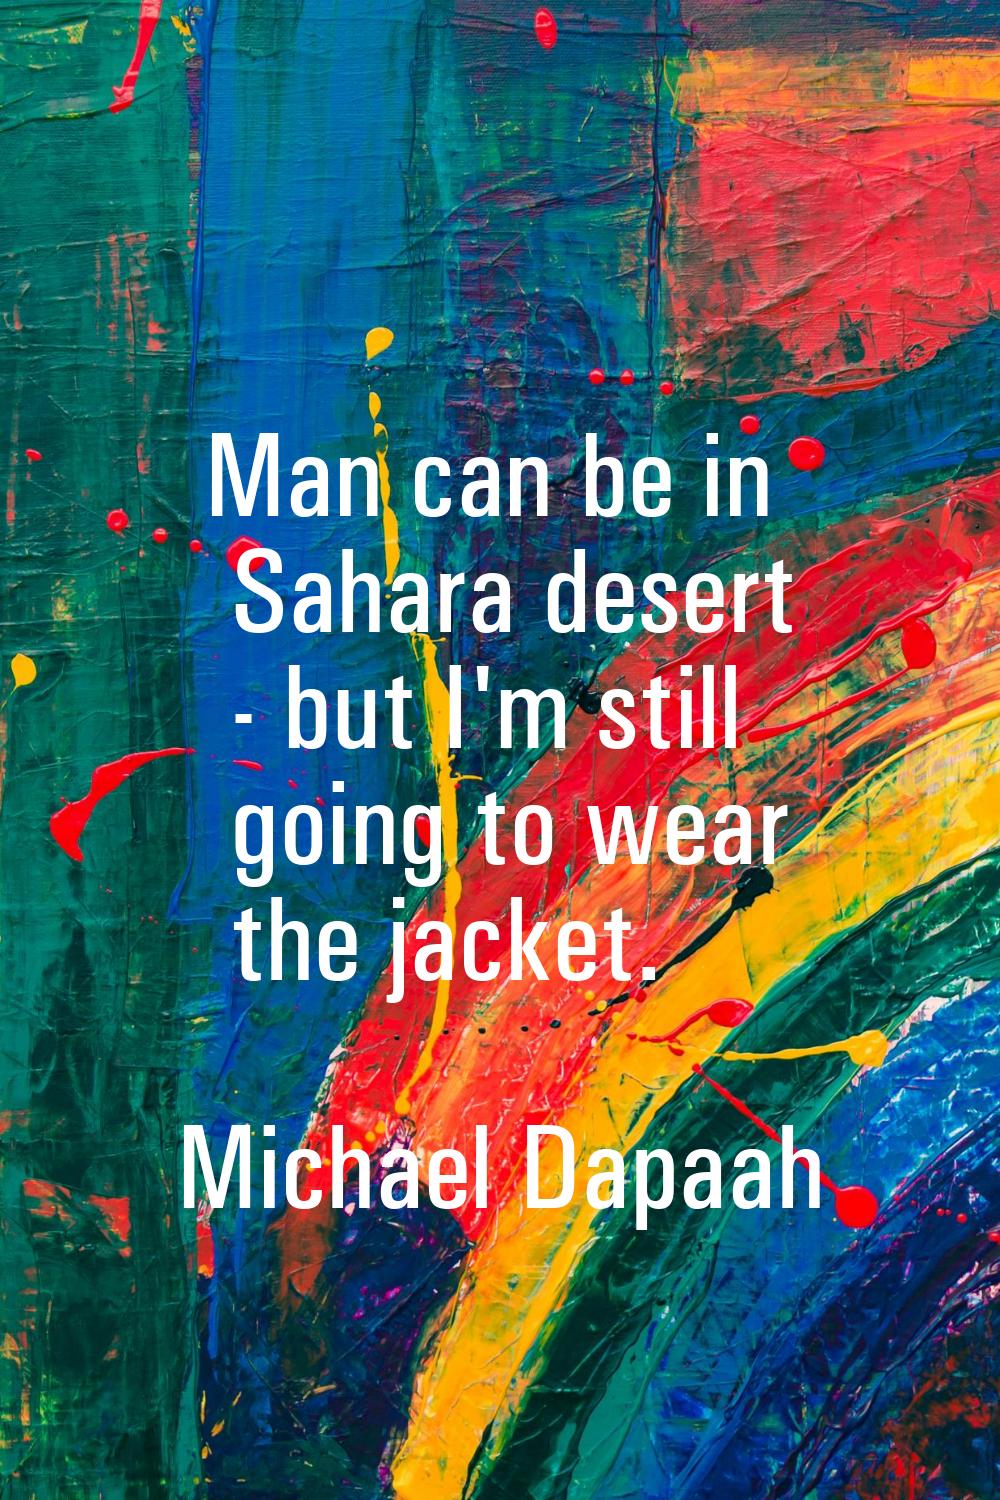 Man can be in Sahara desert - but I'm still going to wear the jacket.